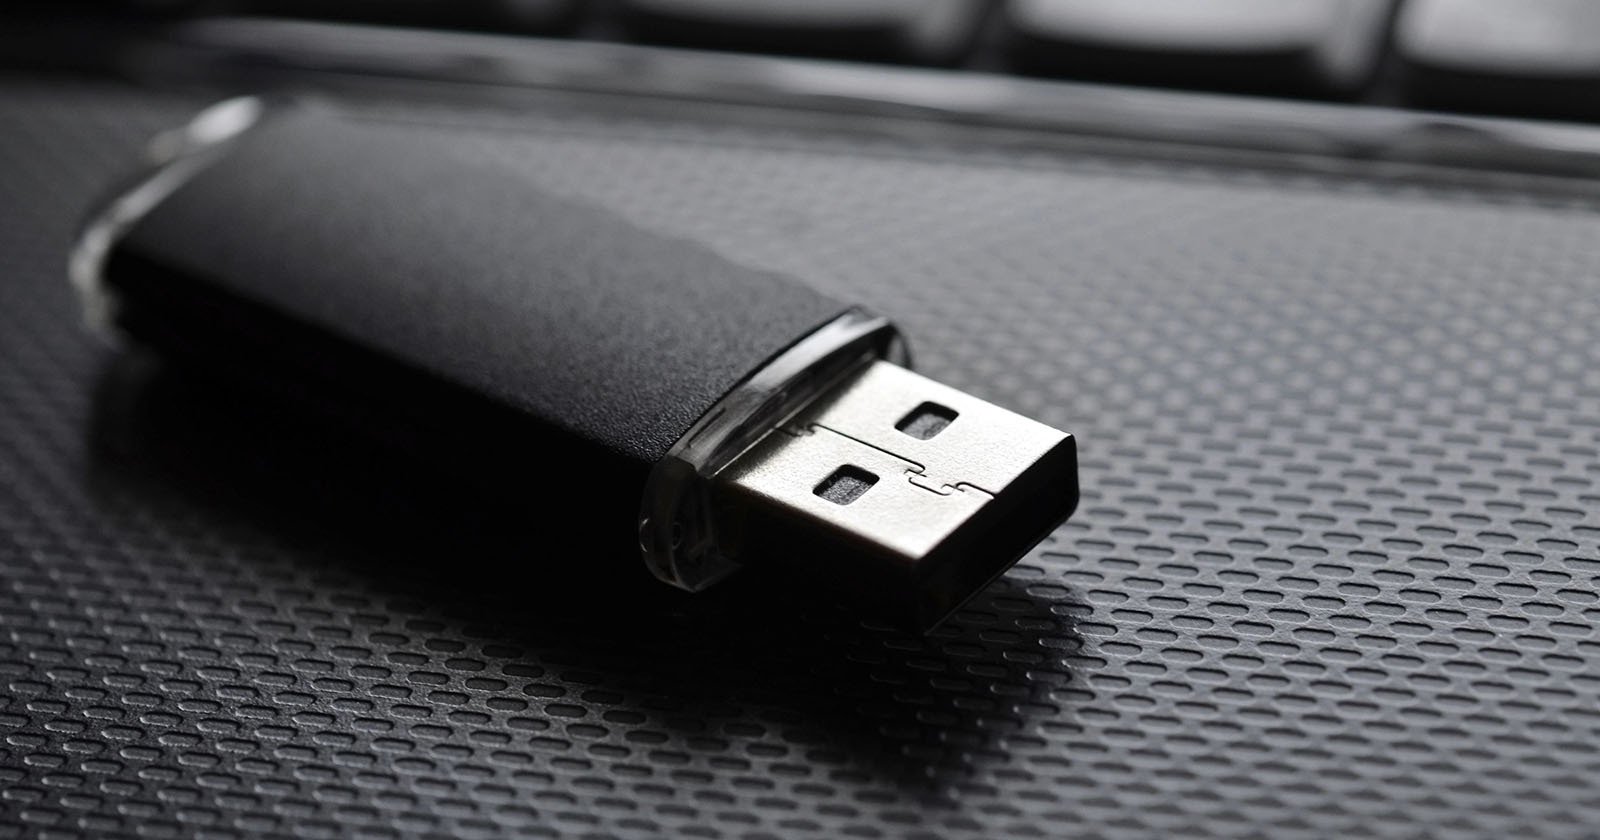 German Data Specialists Finds Many Faulty USB Thumb Drives